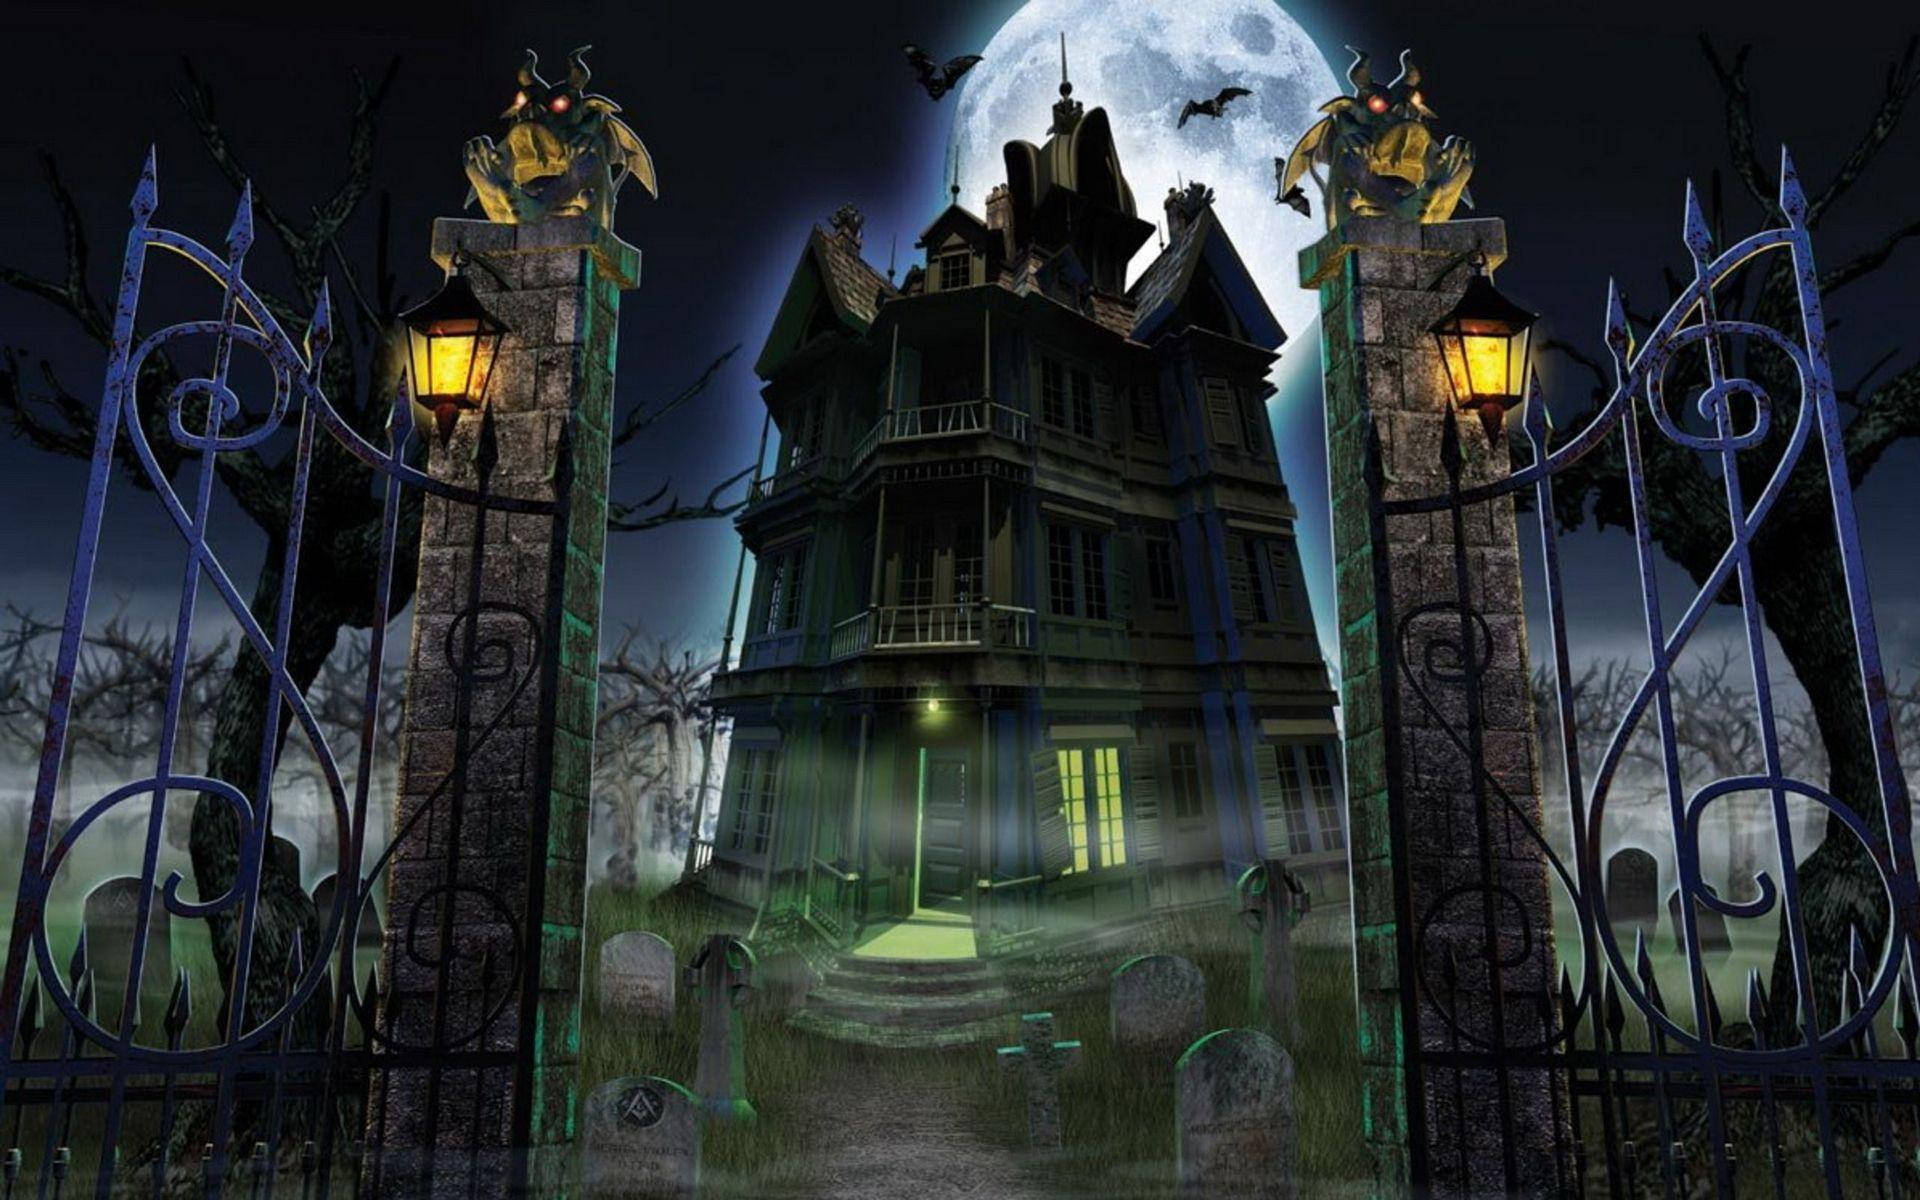 Scare yourself this Halloween with a Trip through a Haunted House! Wallpaper